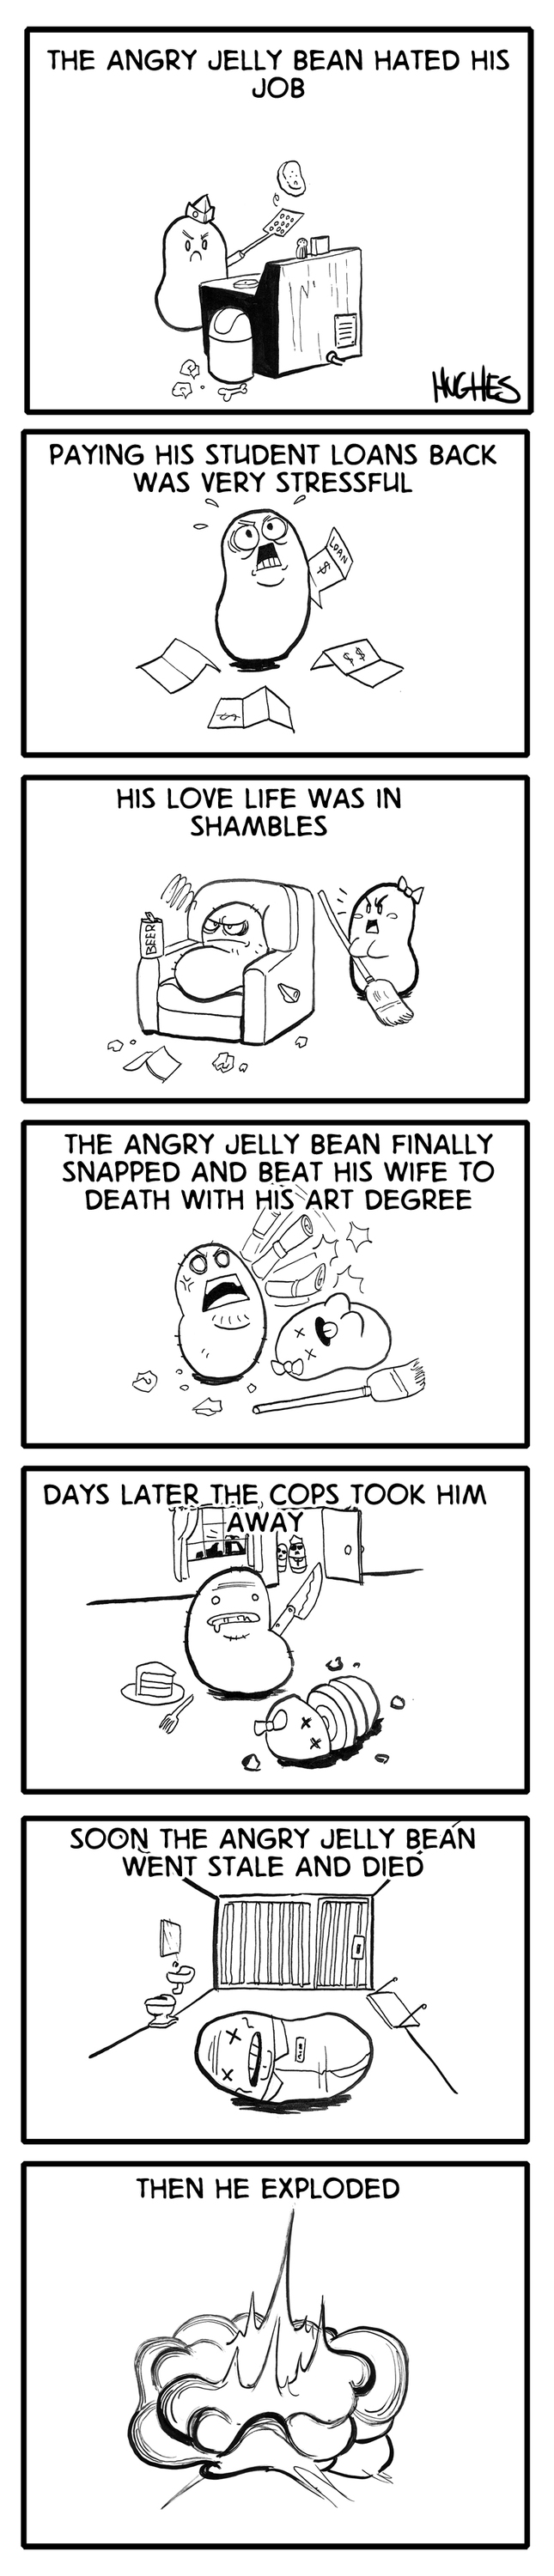 The Angry Jelly Bean